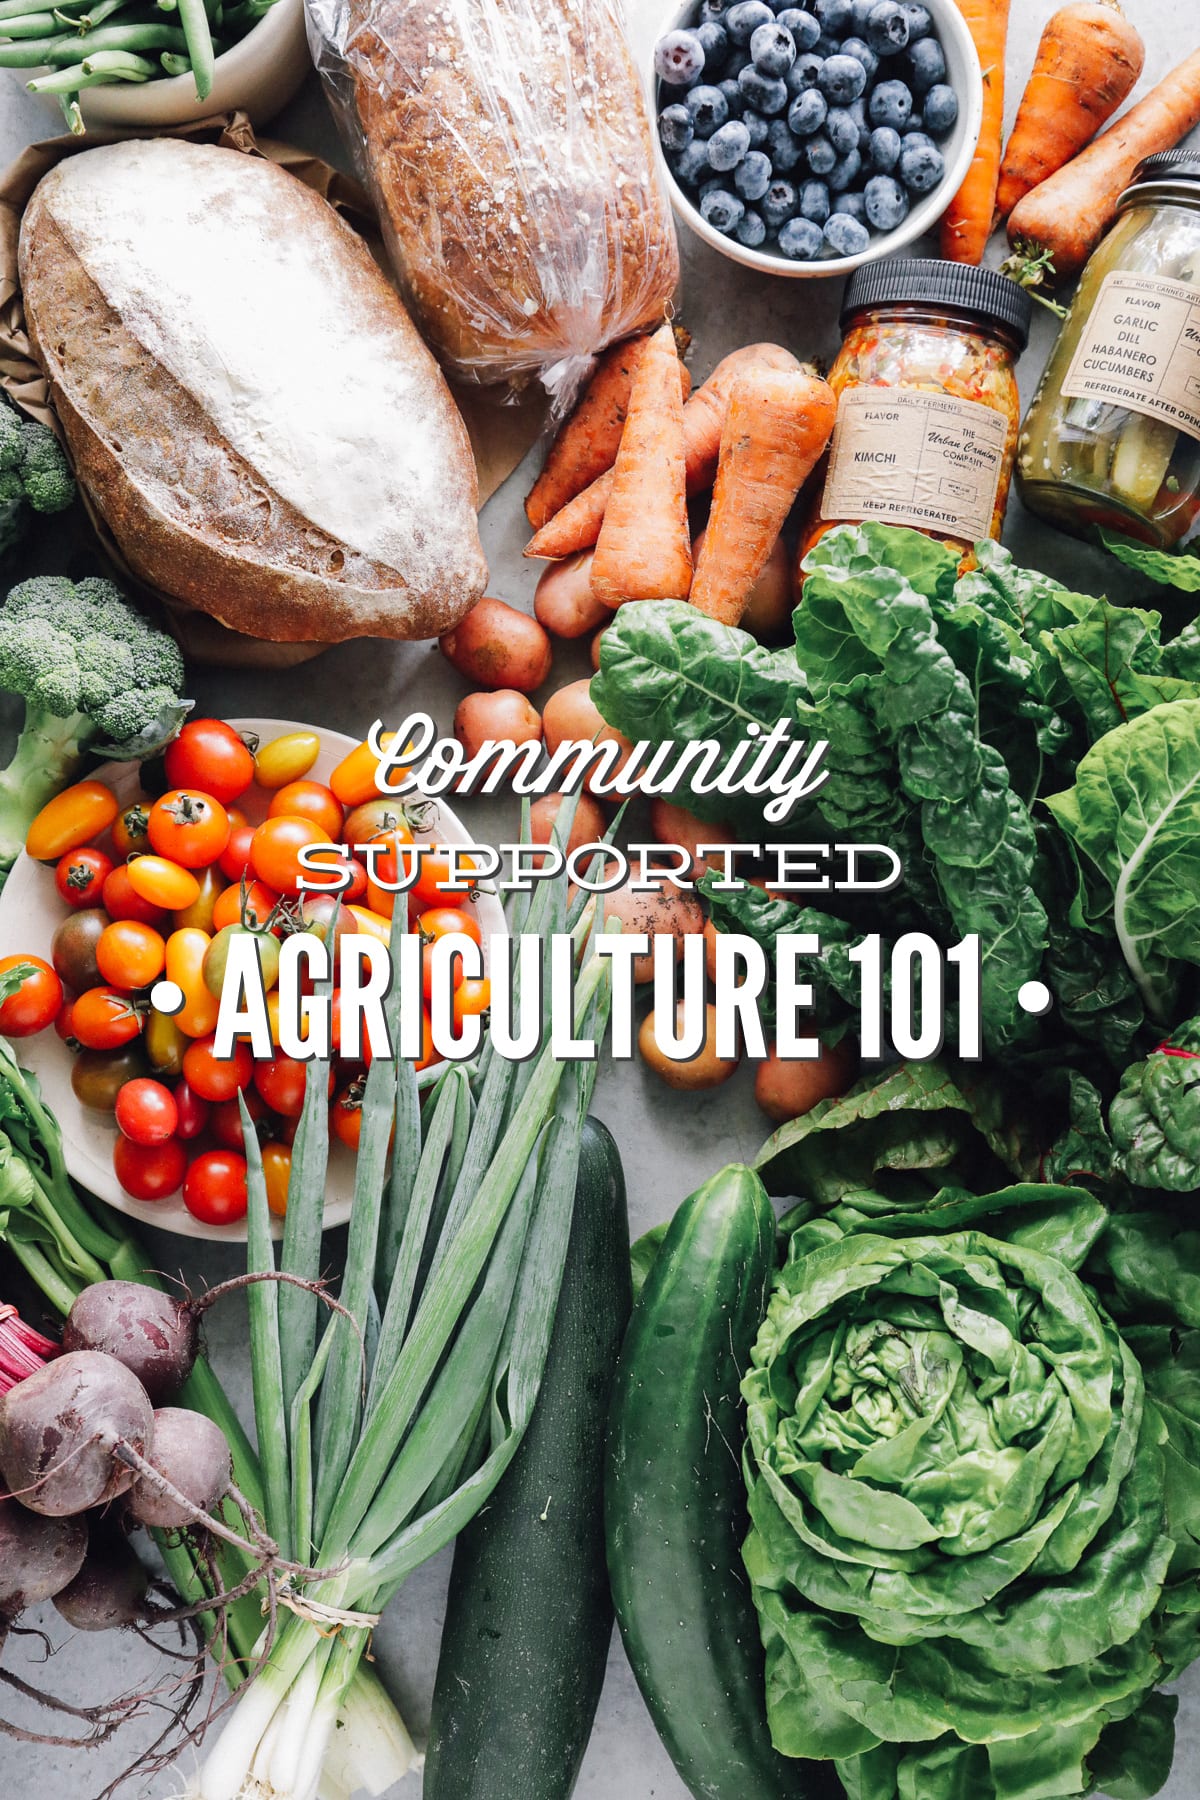 Community Supported Agriculture 101: The Local Way to Source Real Food